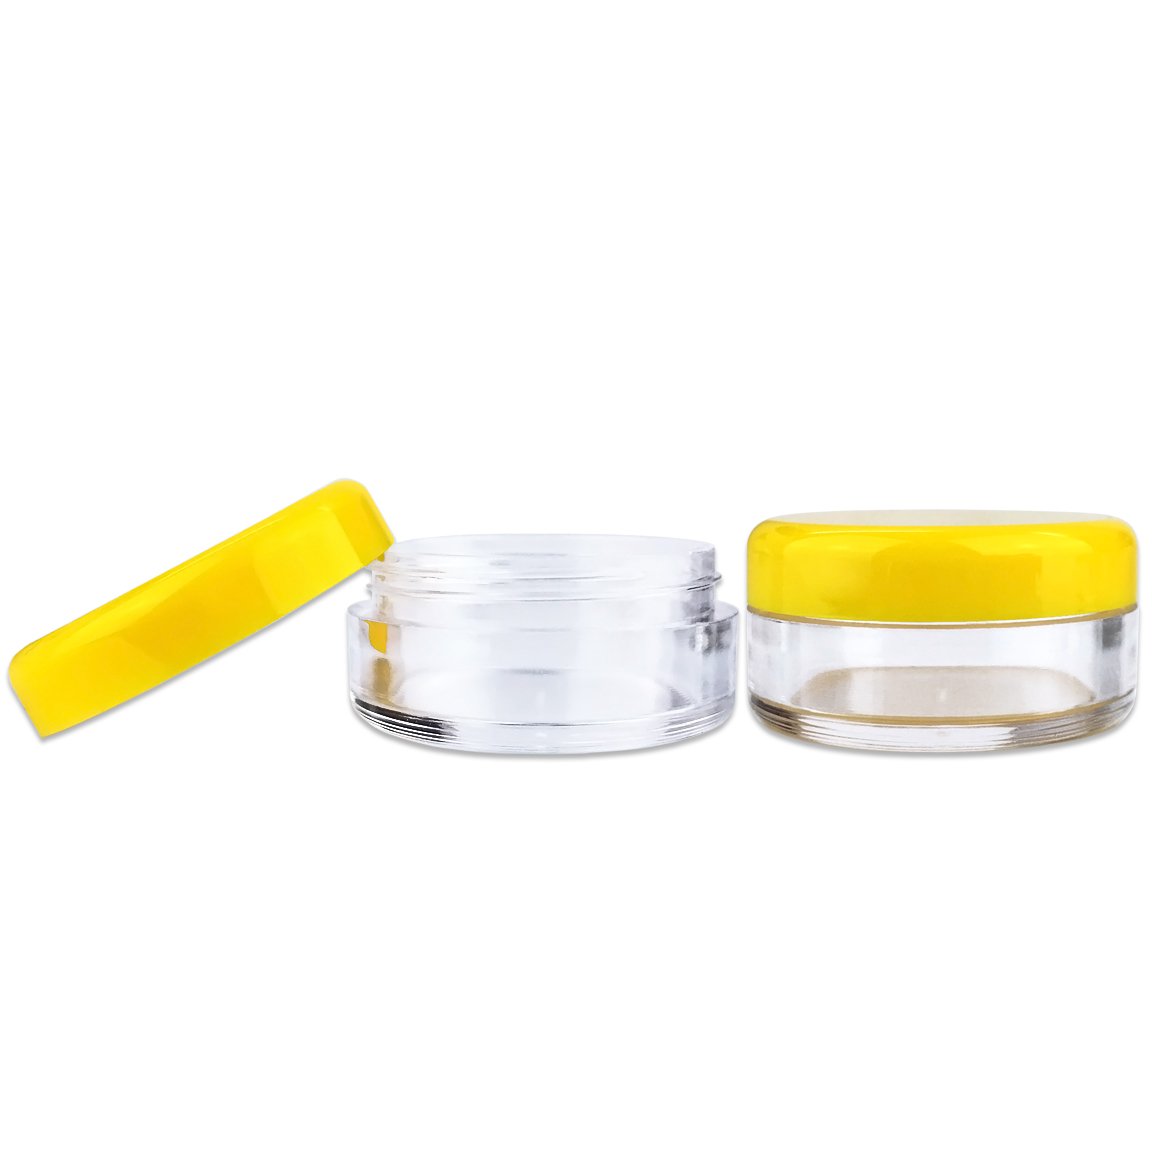 (Quantity: 50 Pieces) Beauticom 5G/5ML Round Clear Jars with Yellow Lids for Scrubs, Oils, Toner, Salves, Creams, Lotions, Makeup Samples, Lip Balms